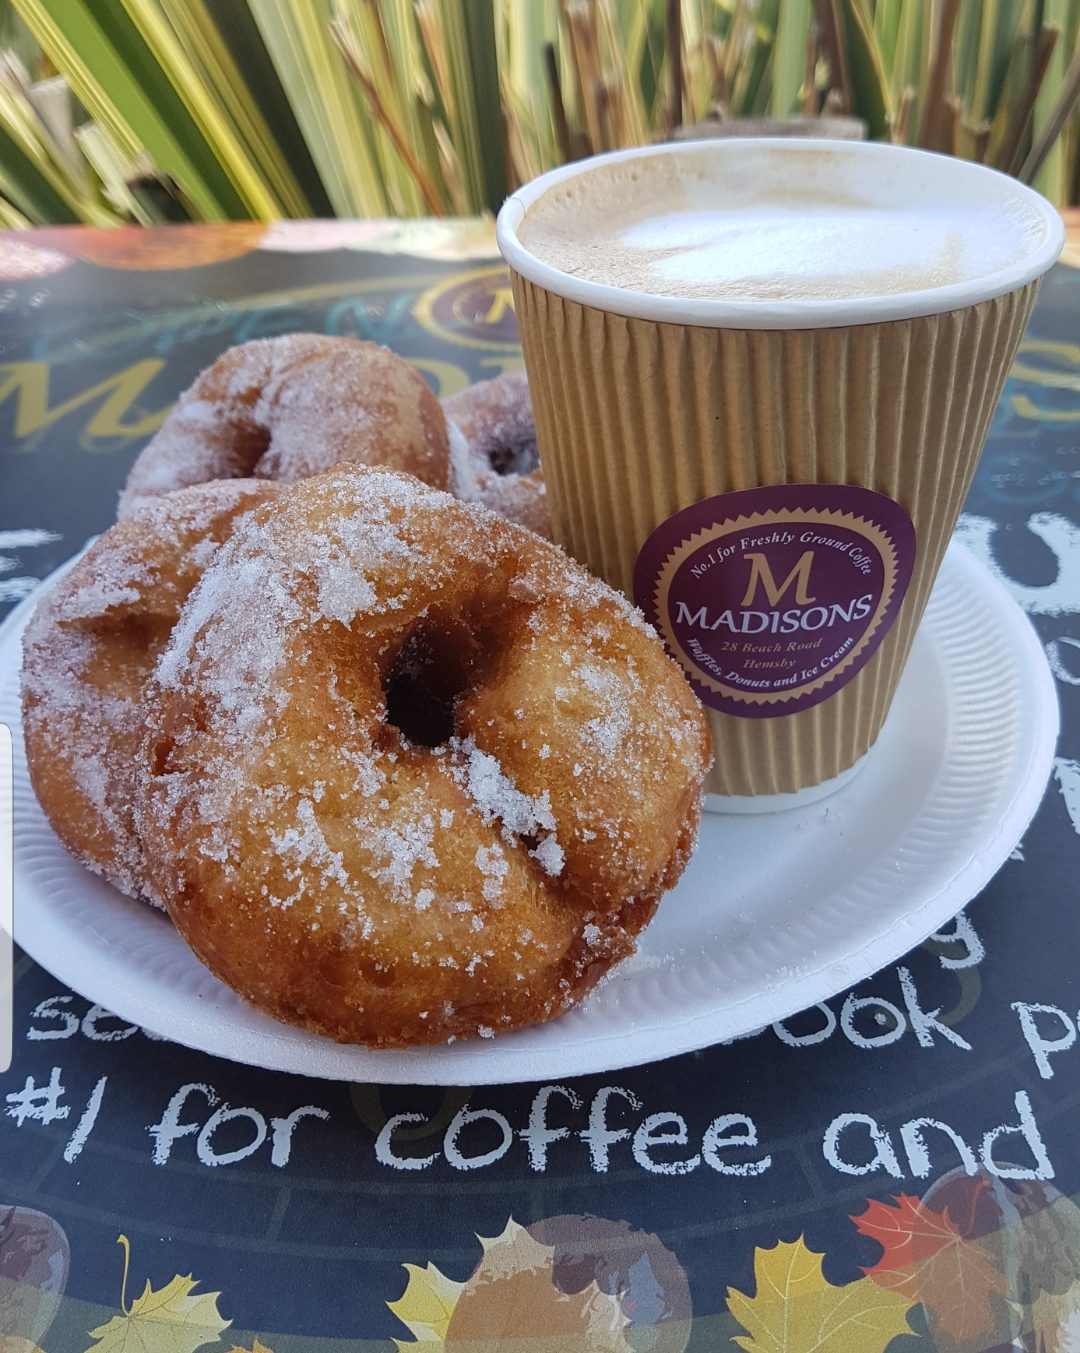 Coffee and doughnuts at Madisons